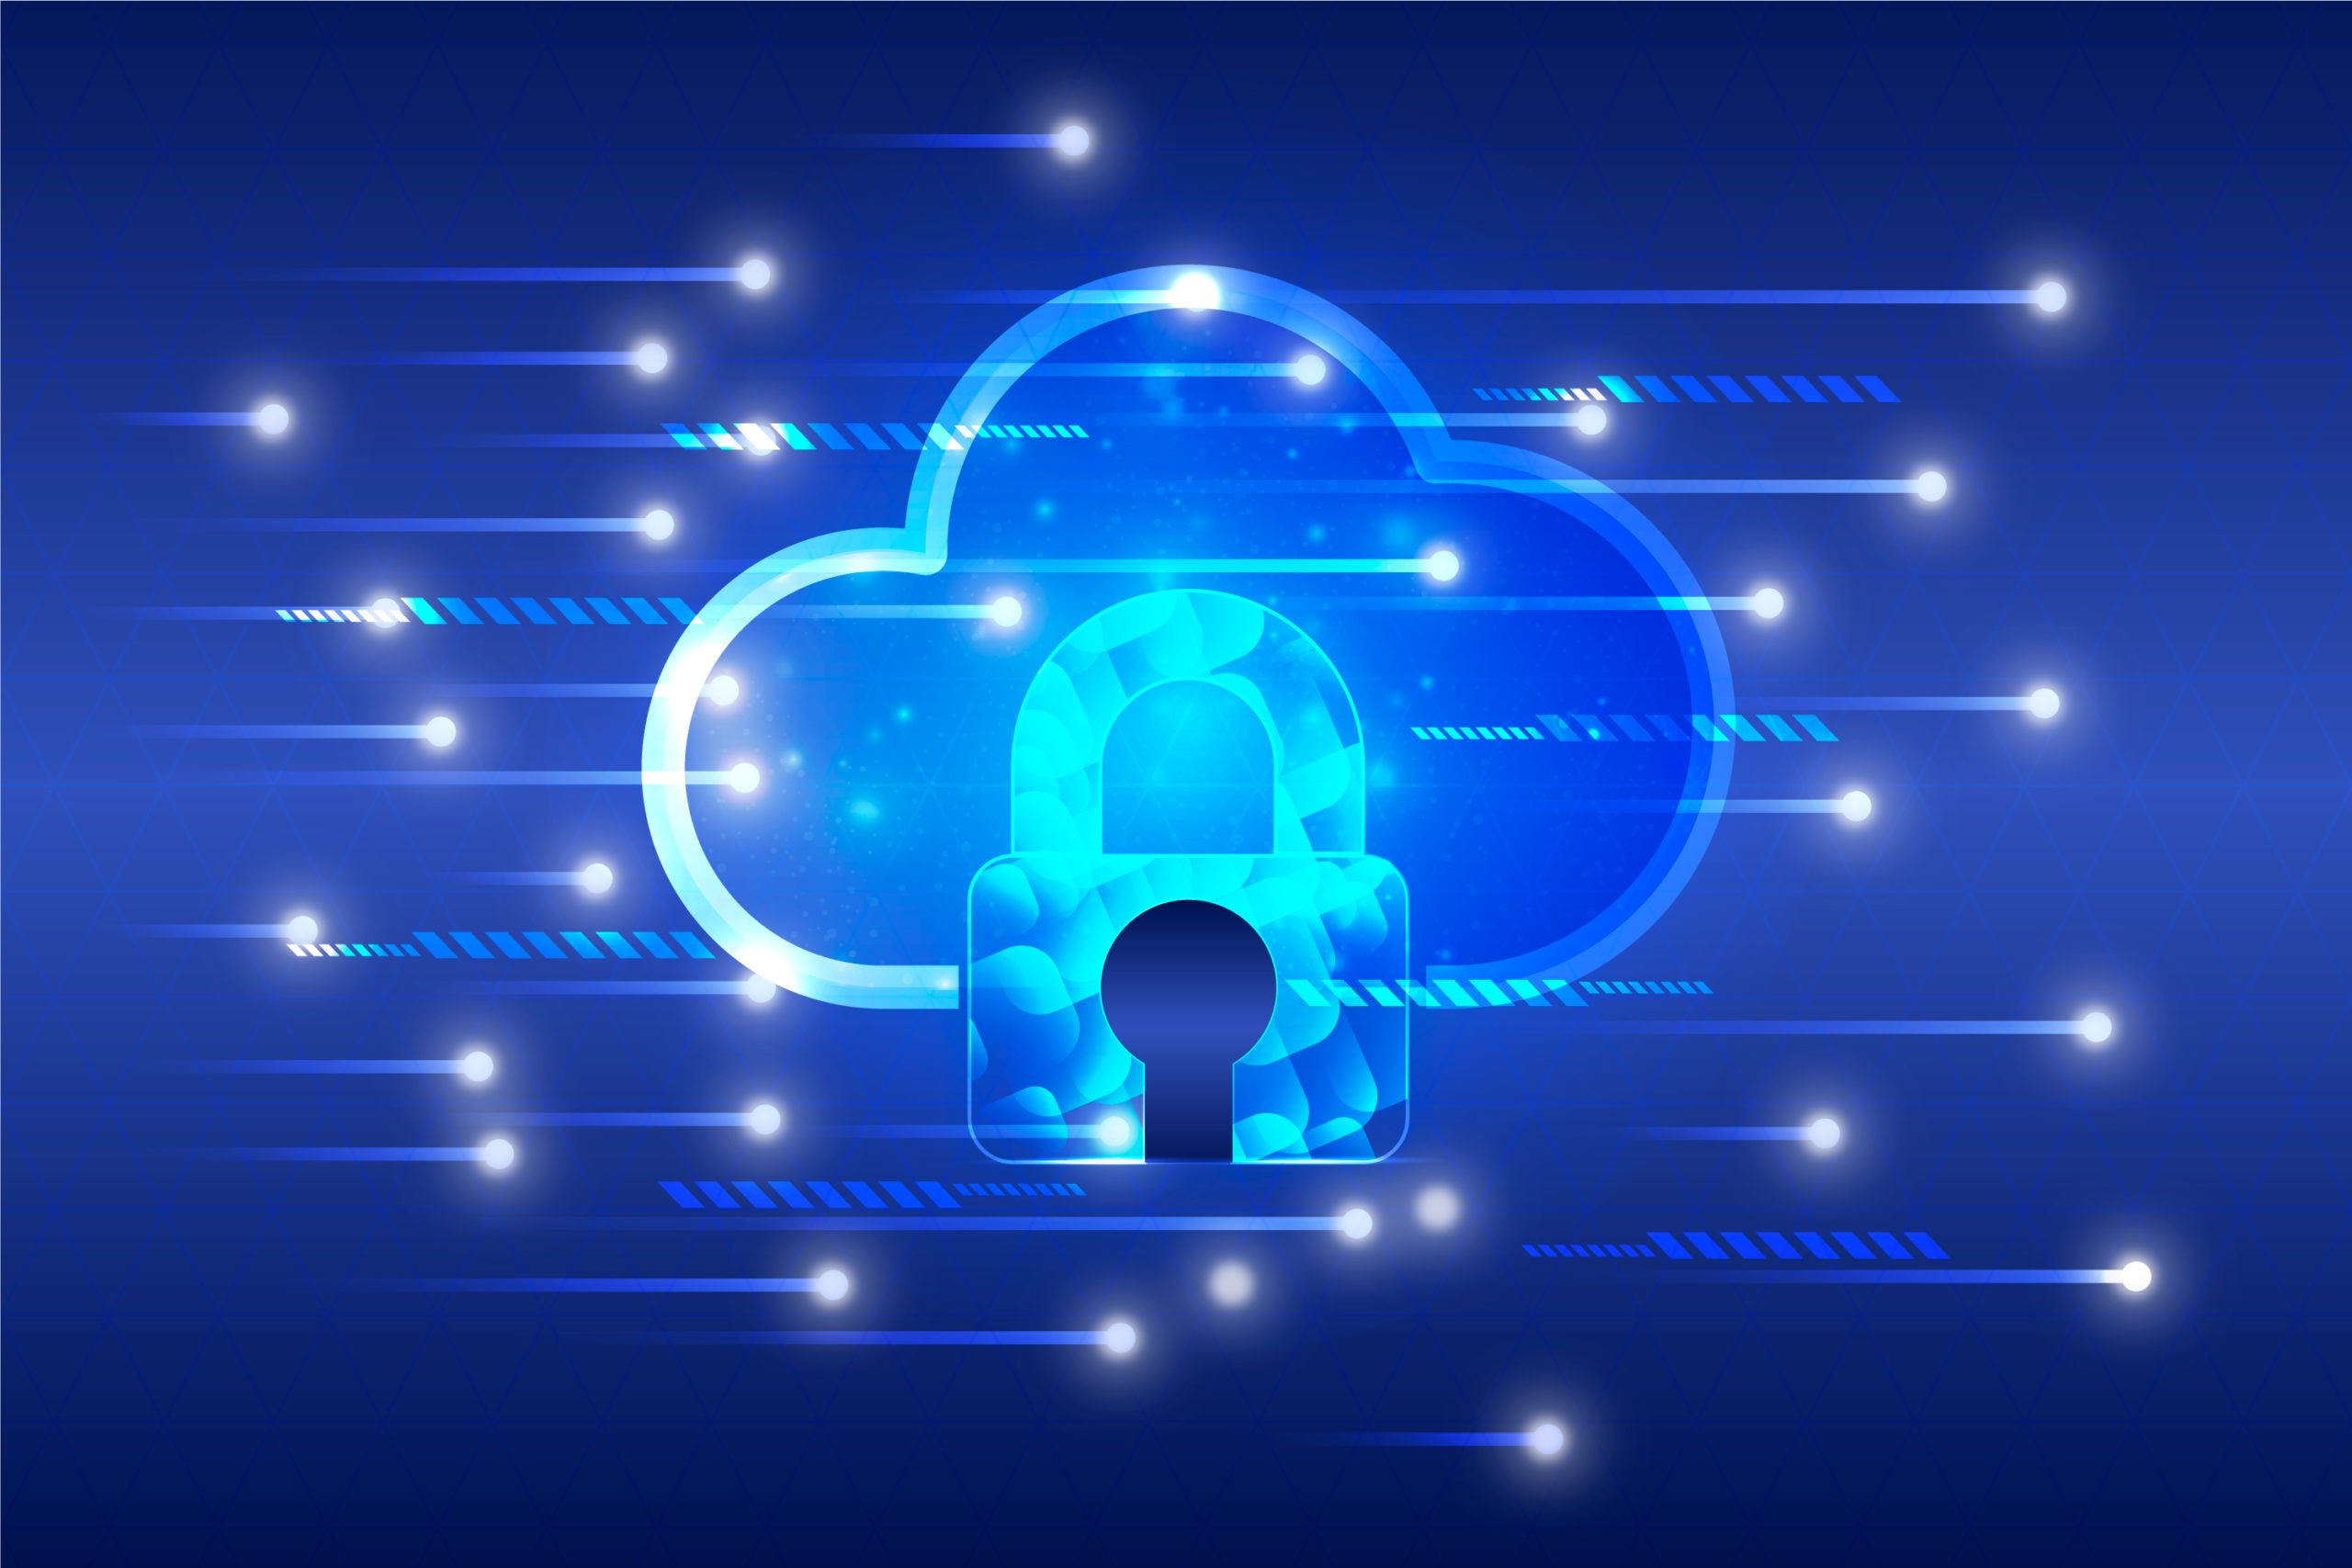 Your Cybersecurity Matters – 3-2-1 Backups for Cloud-Based Services